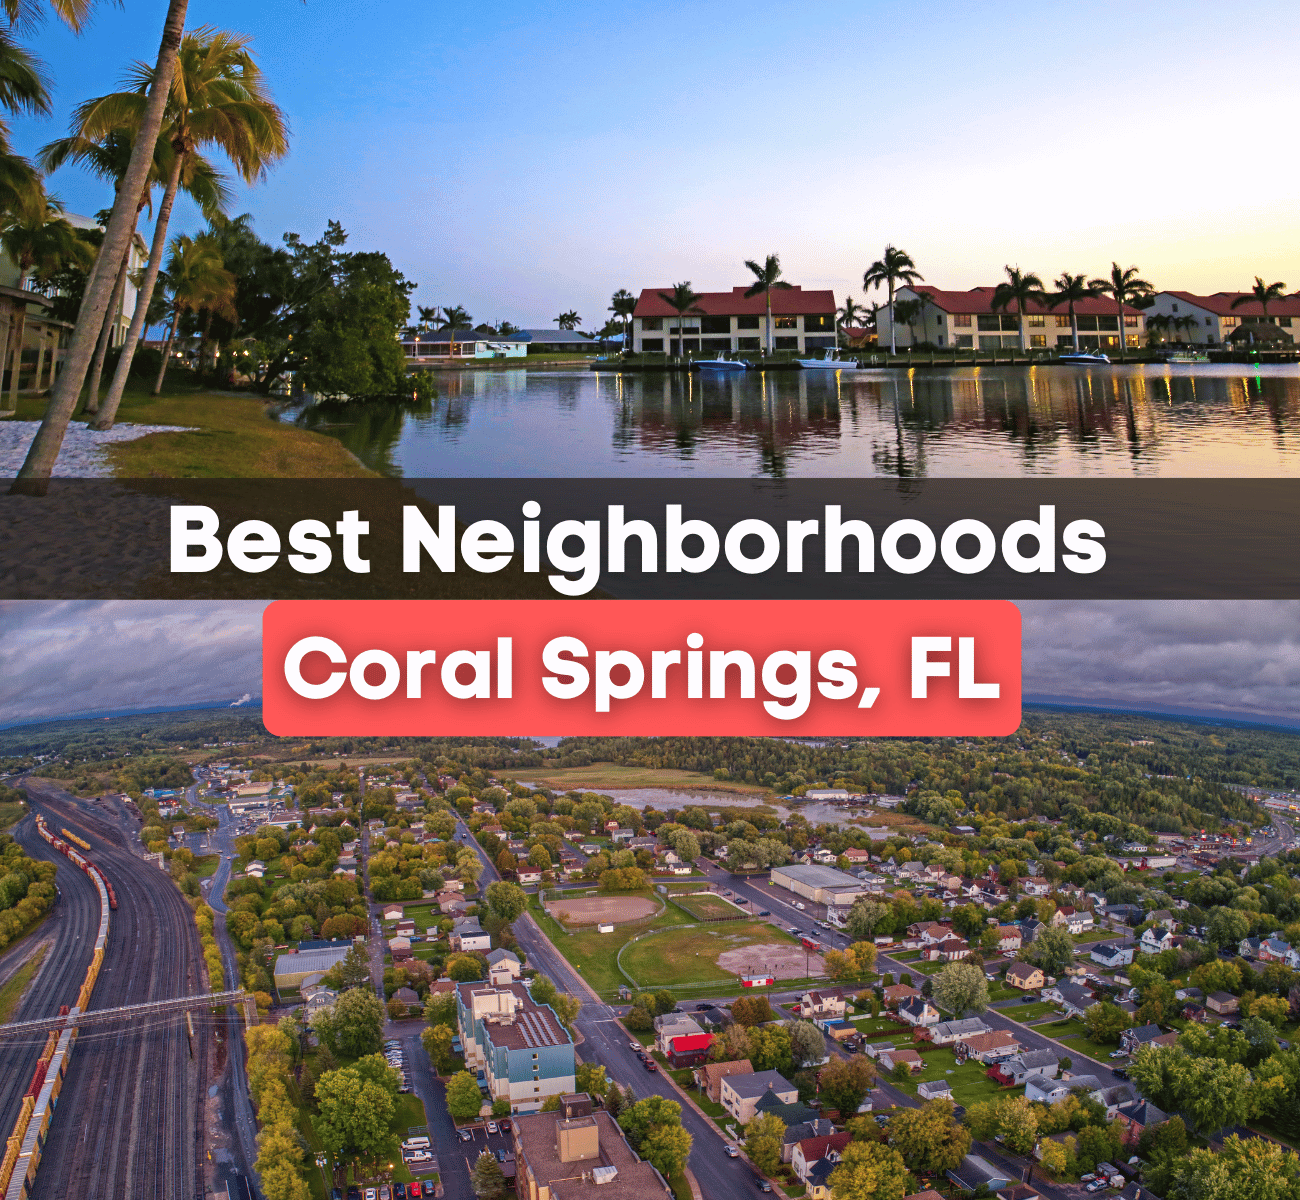 best neighborhoods in Coral Springs, FL graphic with neighborhood near water and palm trees